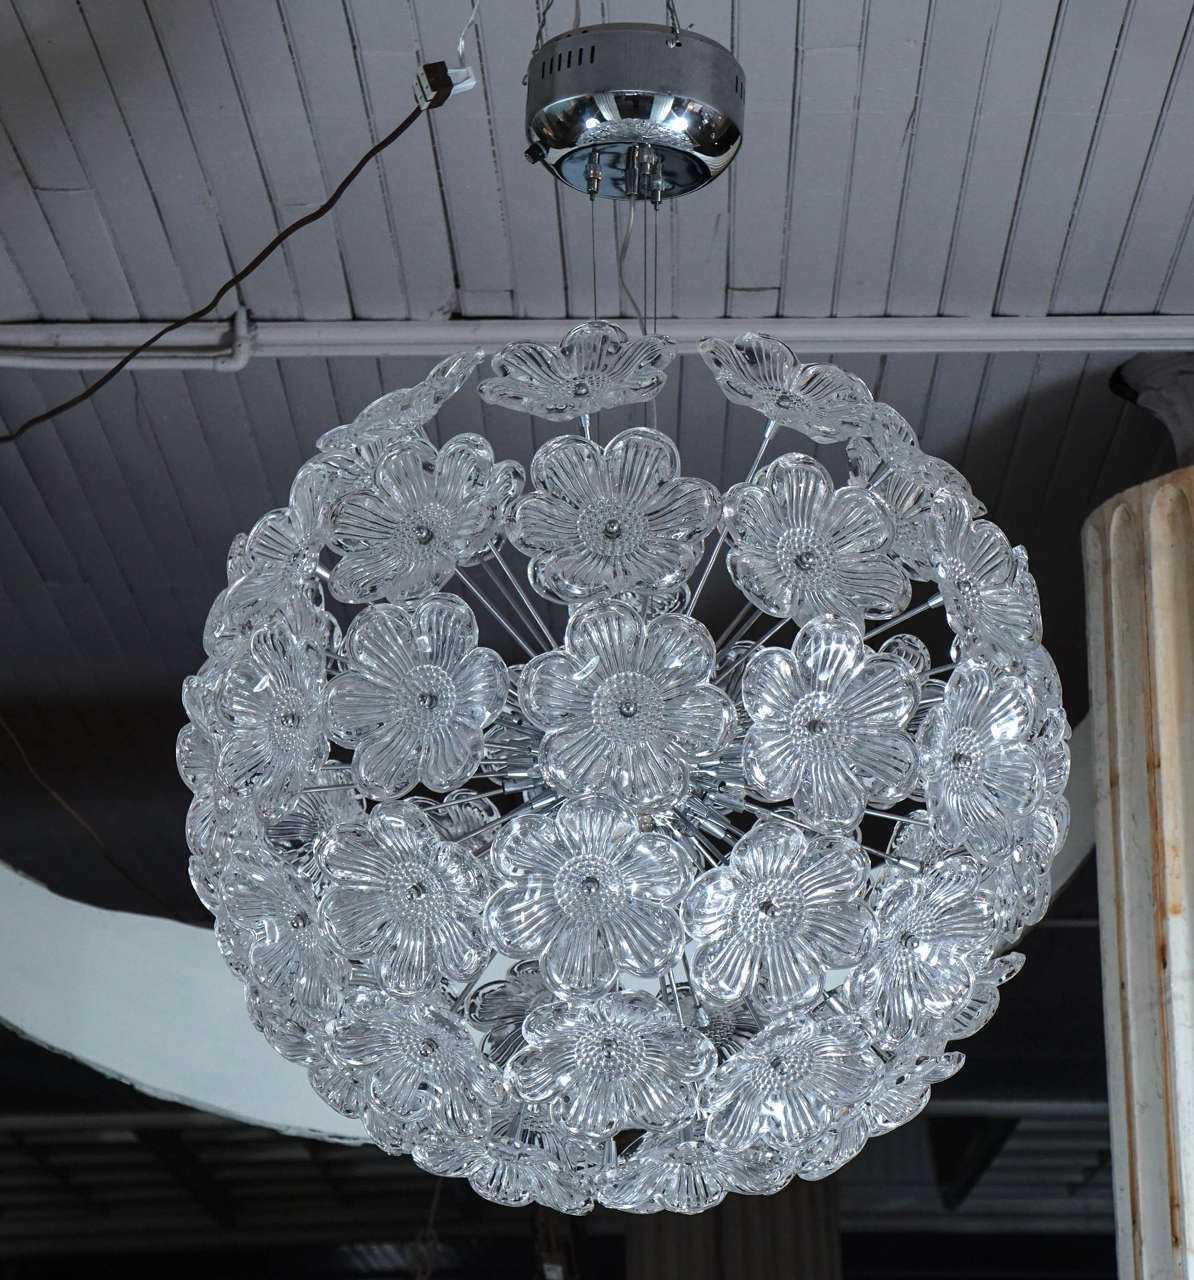 Stunning ball of Murano clear glass flowers, protruding on chrome stems, from a central chrome ball with halogen lights, found in Miami - two additional rosettes included